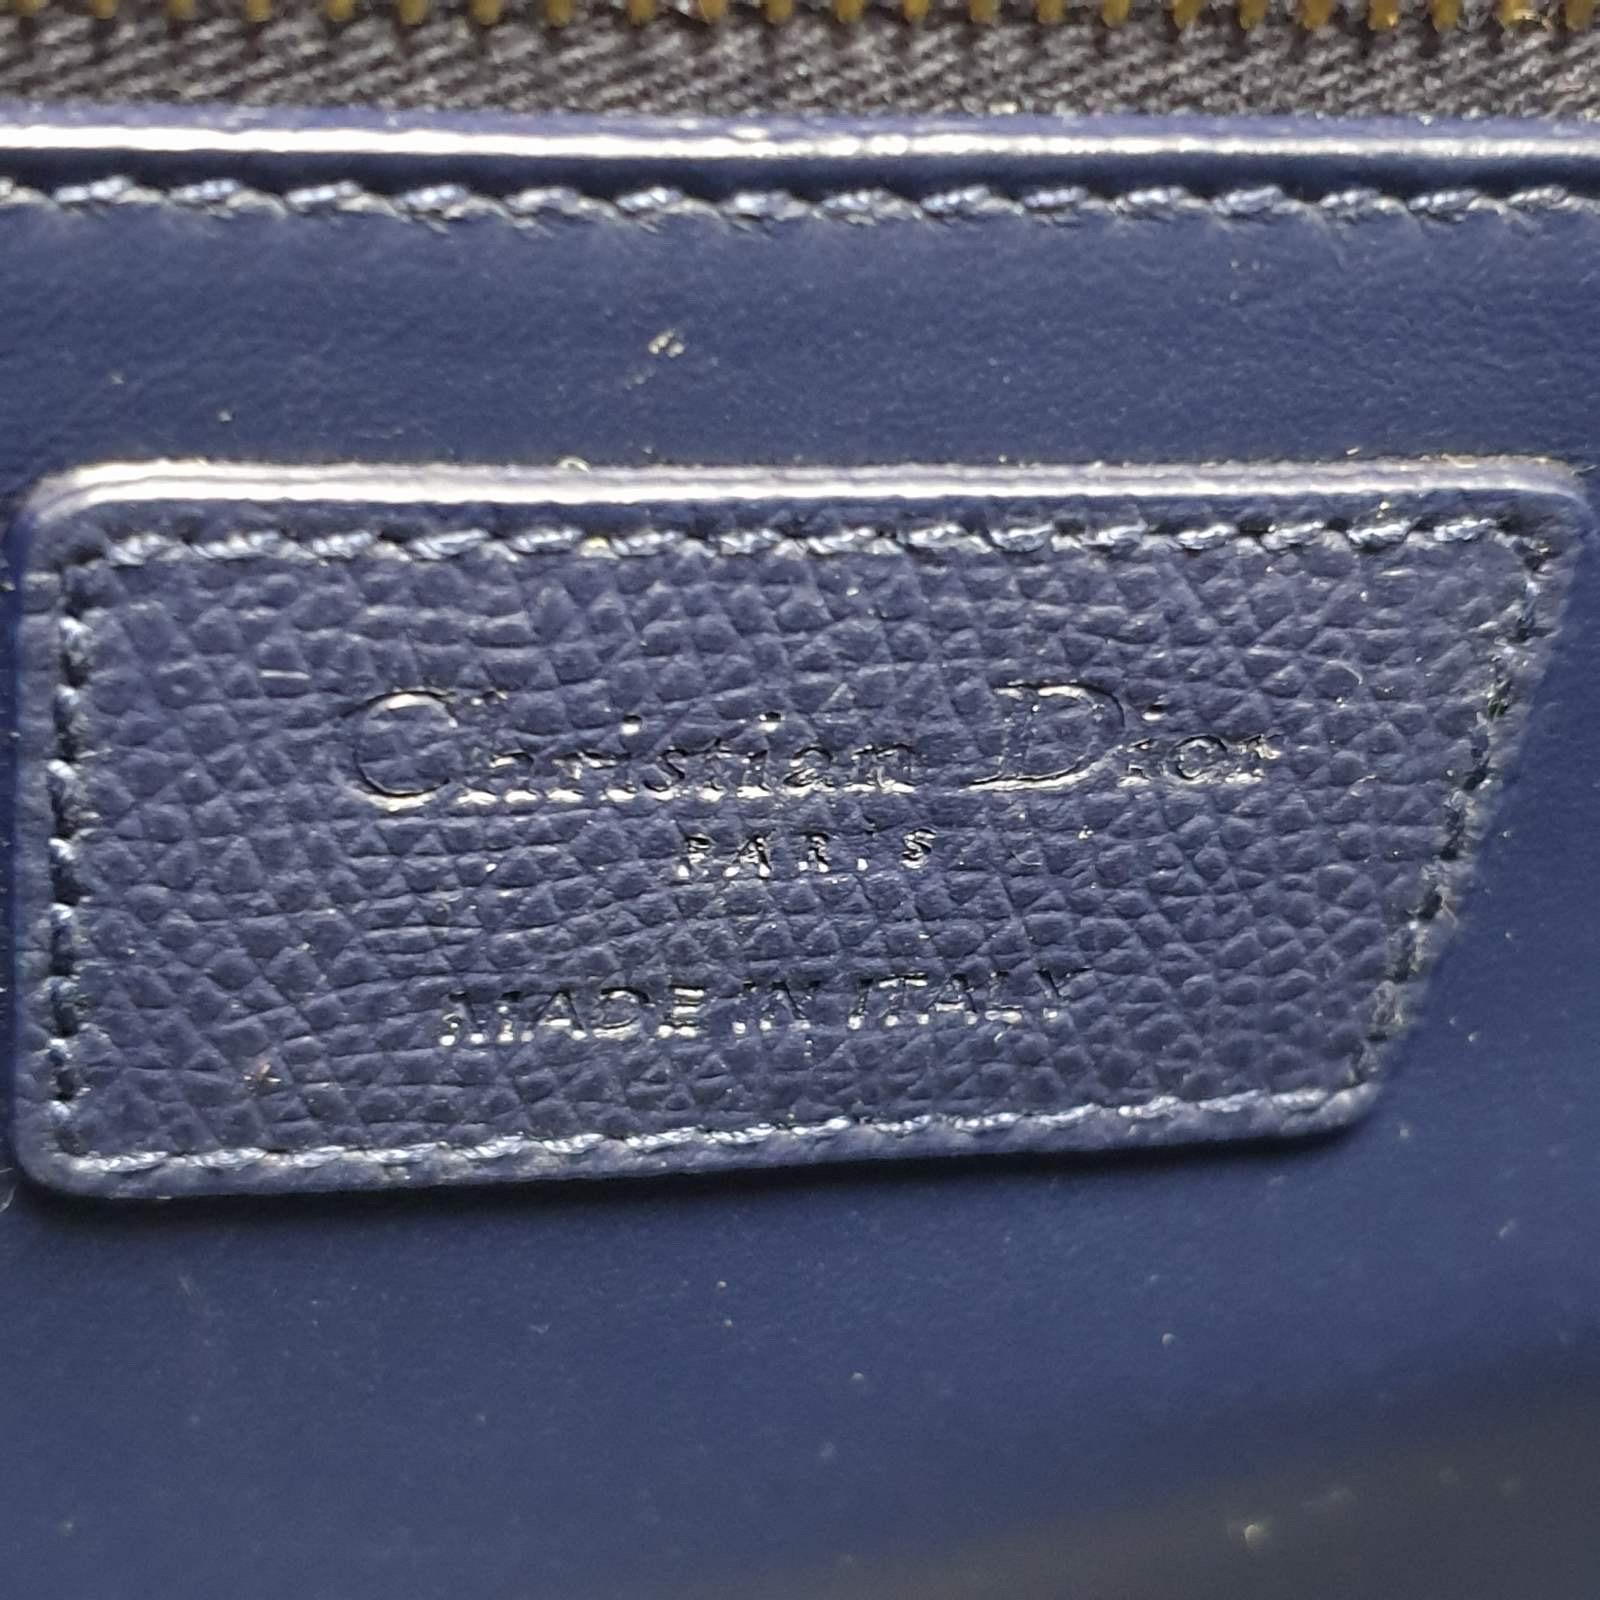 Indigo Blue Ultramatte Grained Calfskin
Flap design closure
'CD' clasp
Embossed '30 MONTAIGNE' signature on the back
Adjustable leather shoulder strap with 'Christian Dior' military-inspired buckle
Interior zip pocket and phone pocket
Back